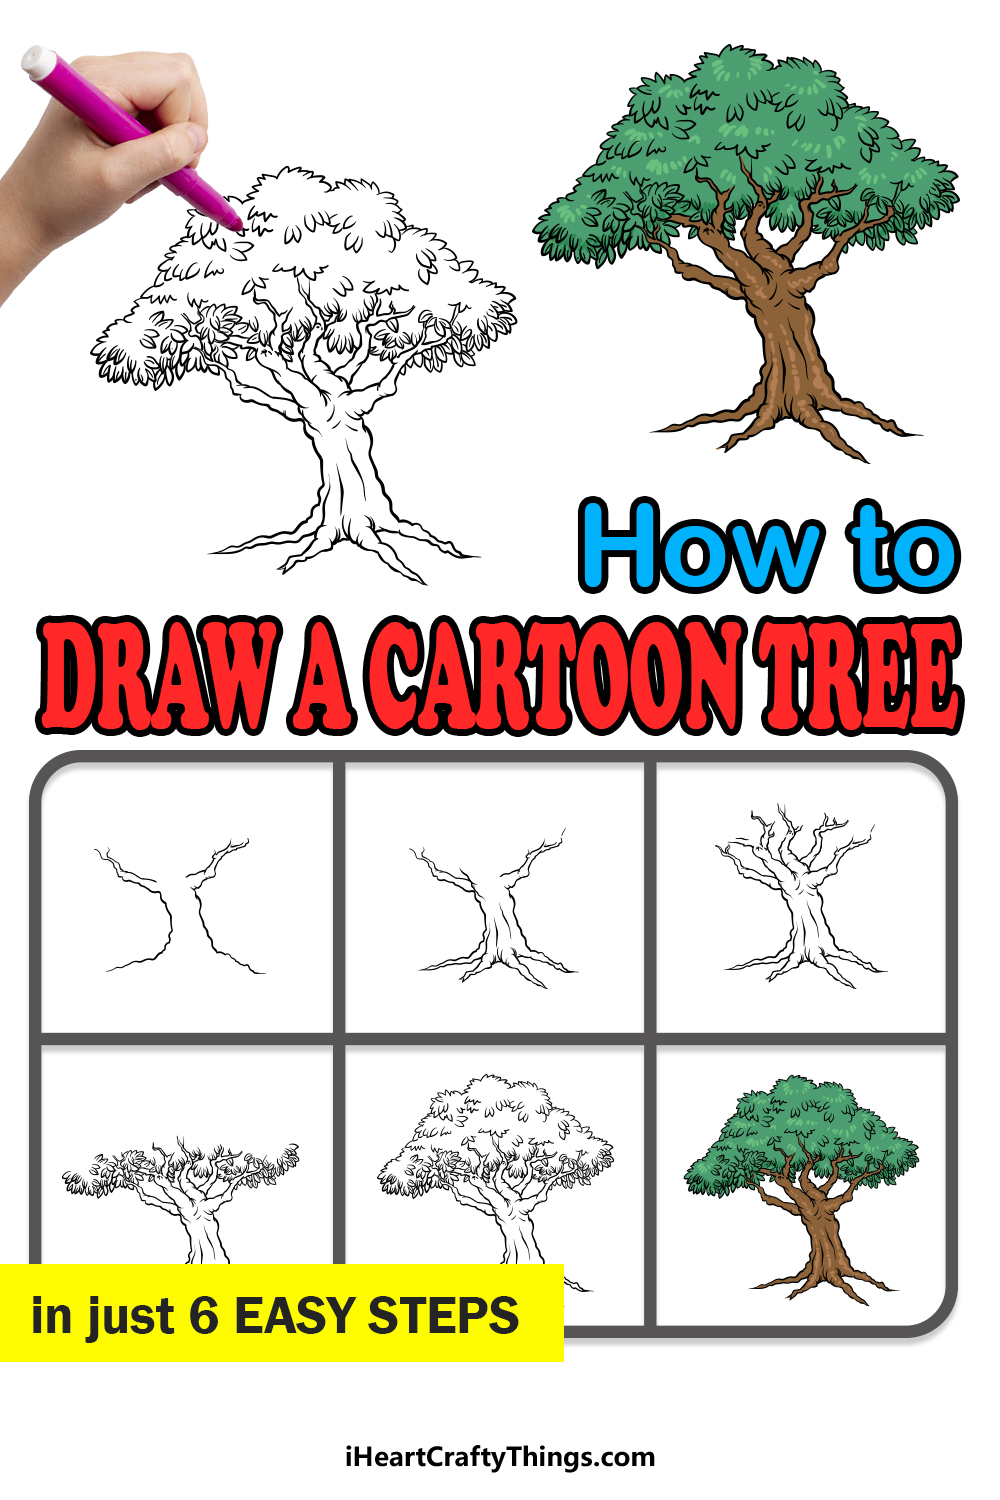 how to draw a Cartoon Tree in 6 easy steps